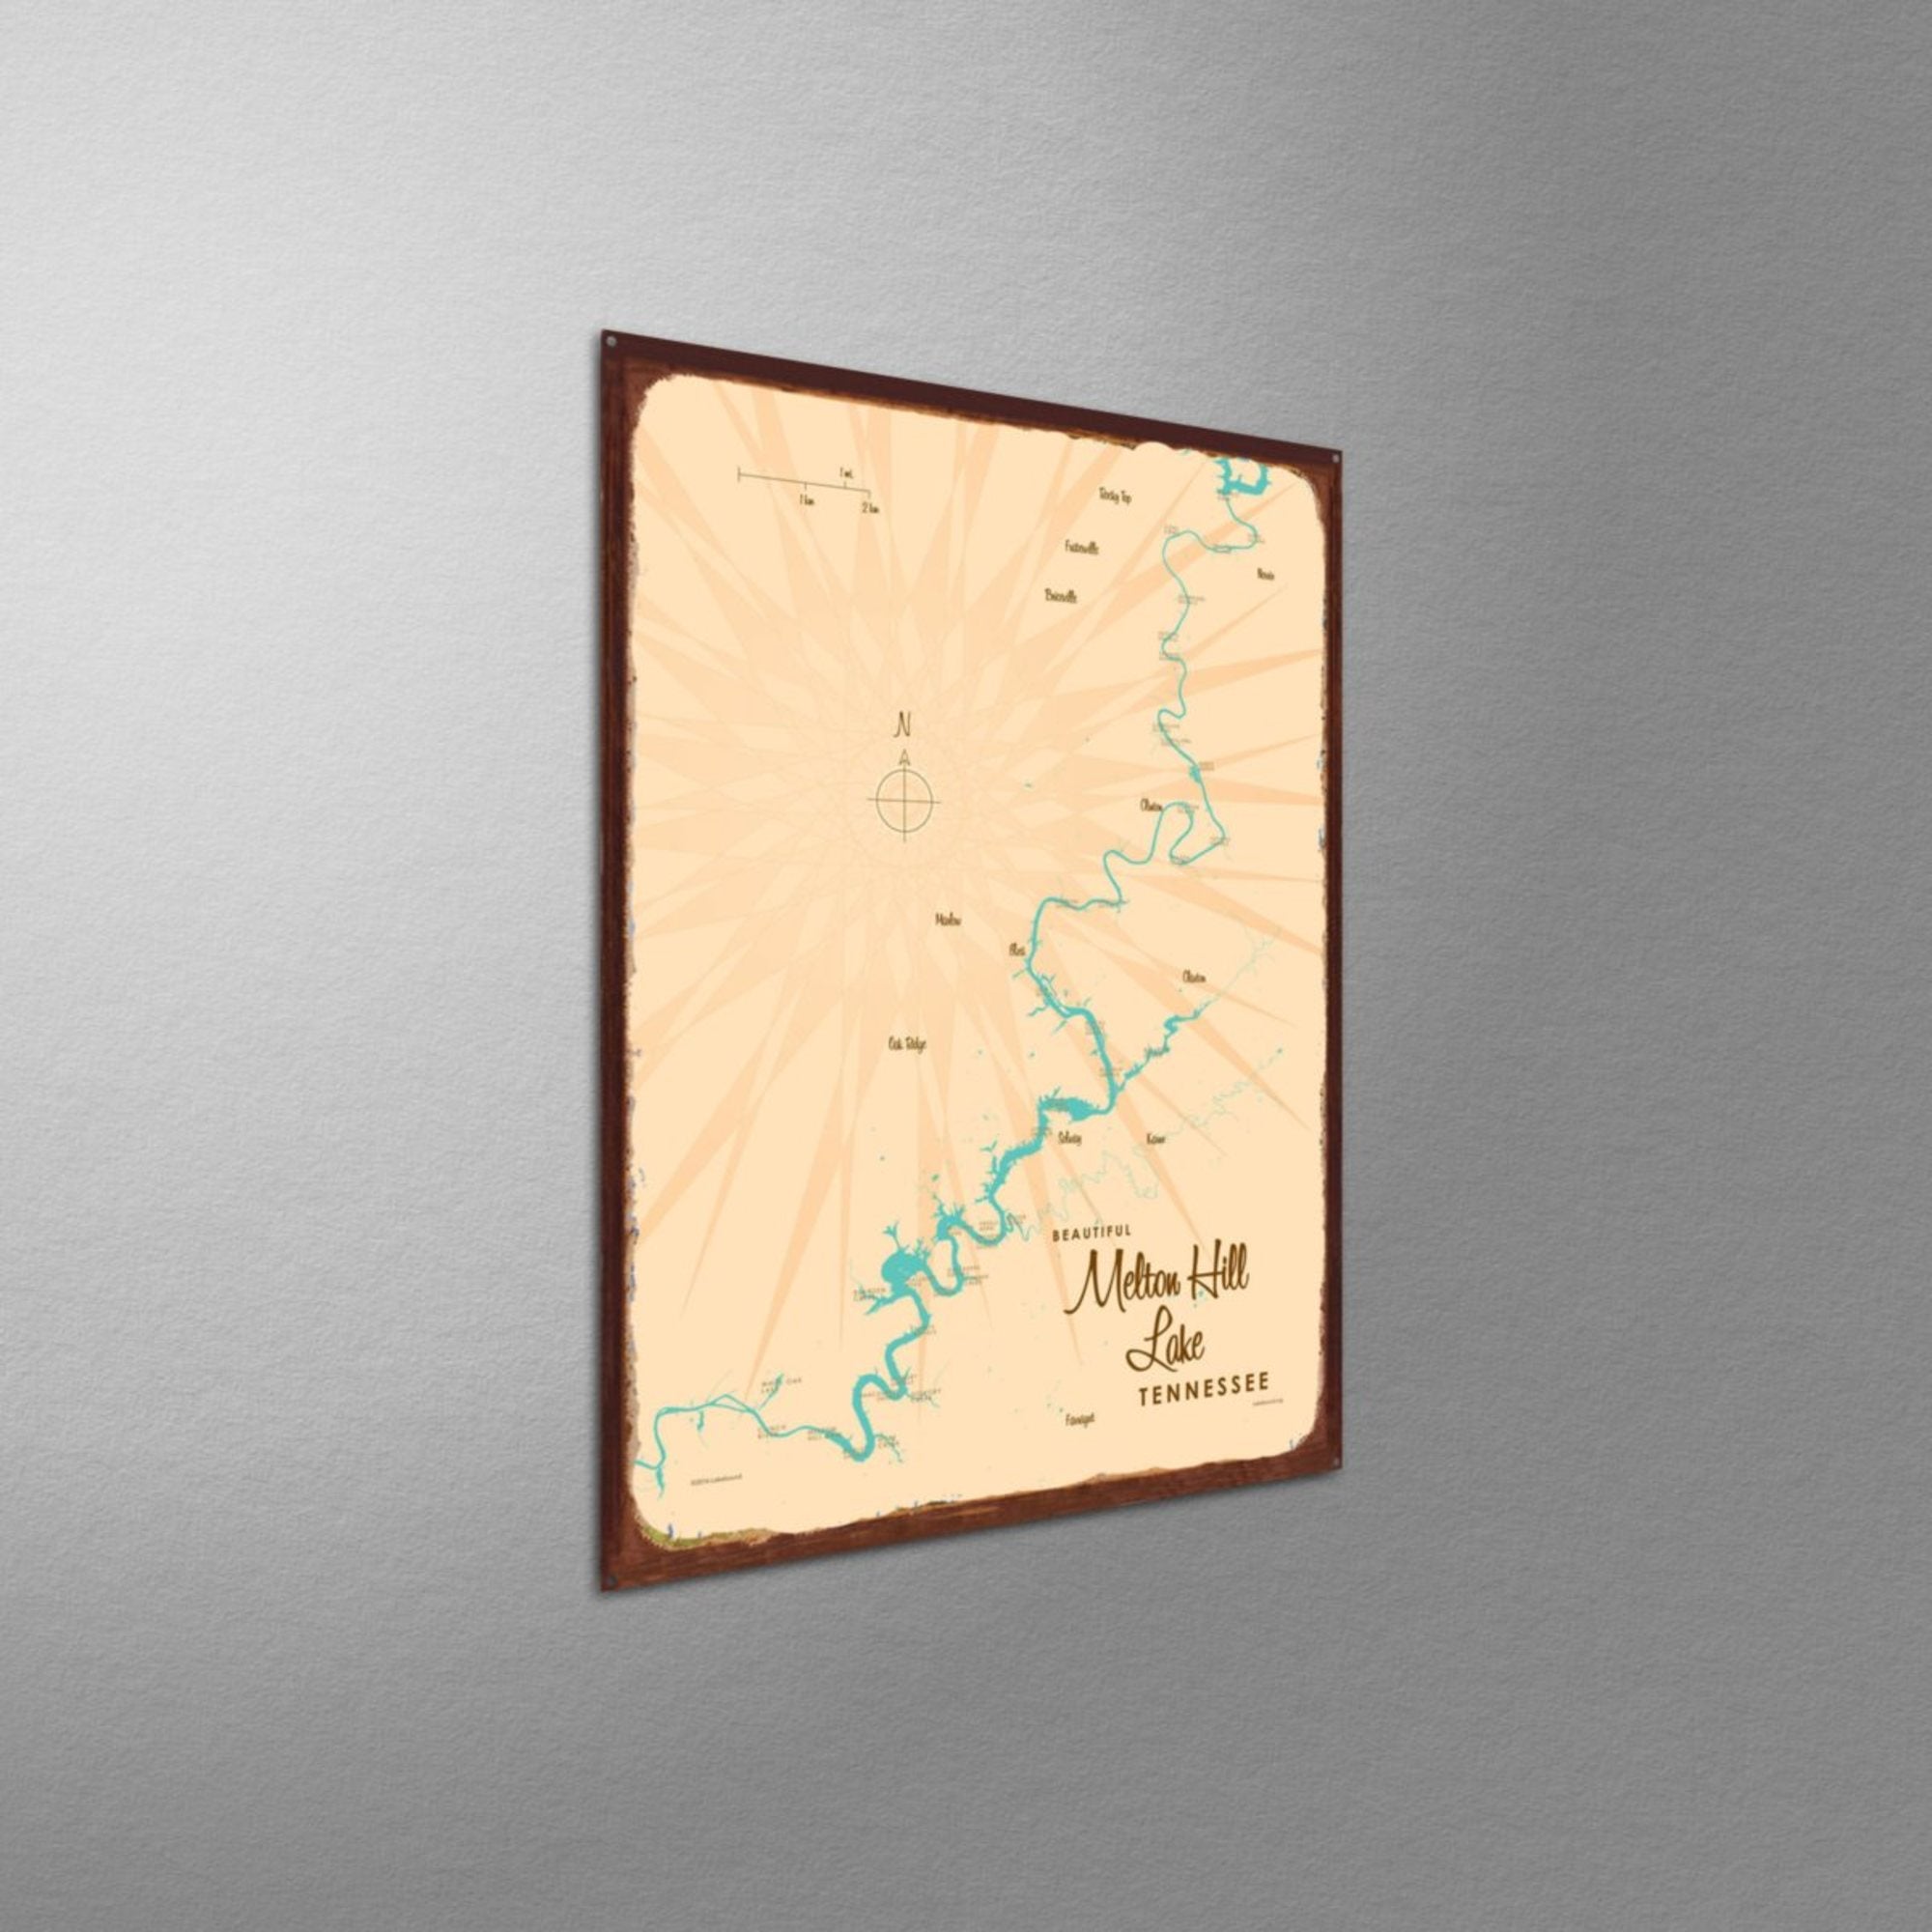 Melton Hill Lake Tennessee, Rustic Metal Sign Map Art